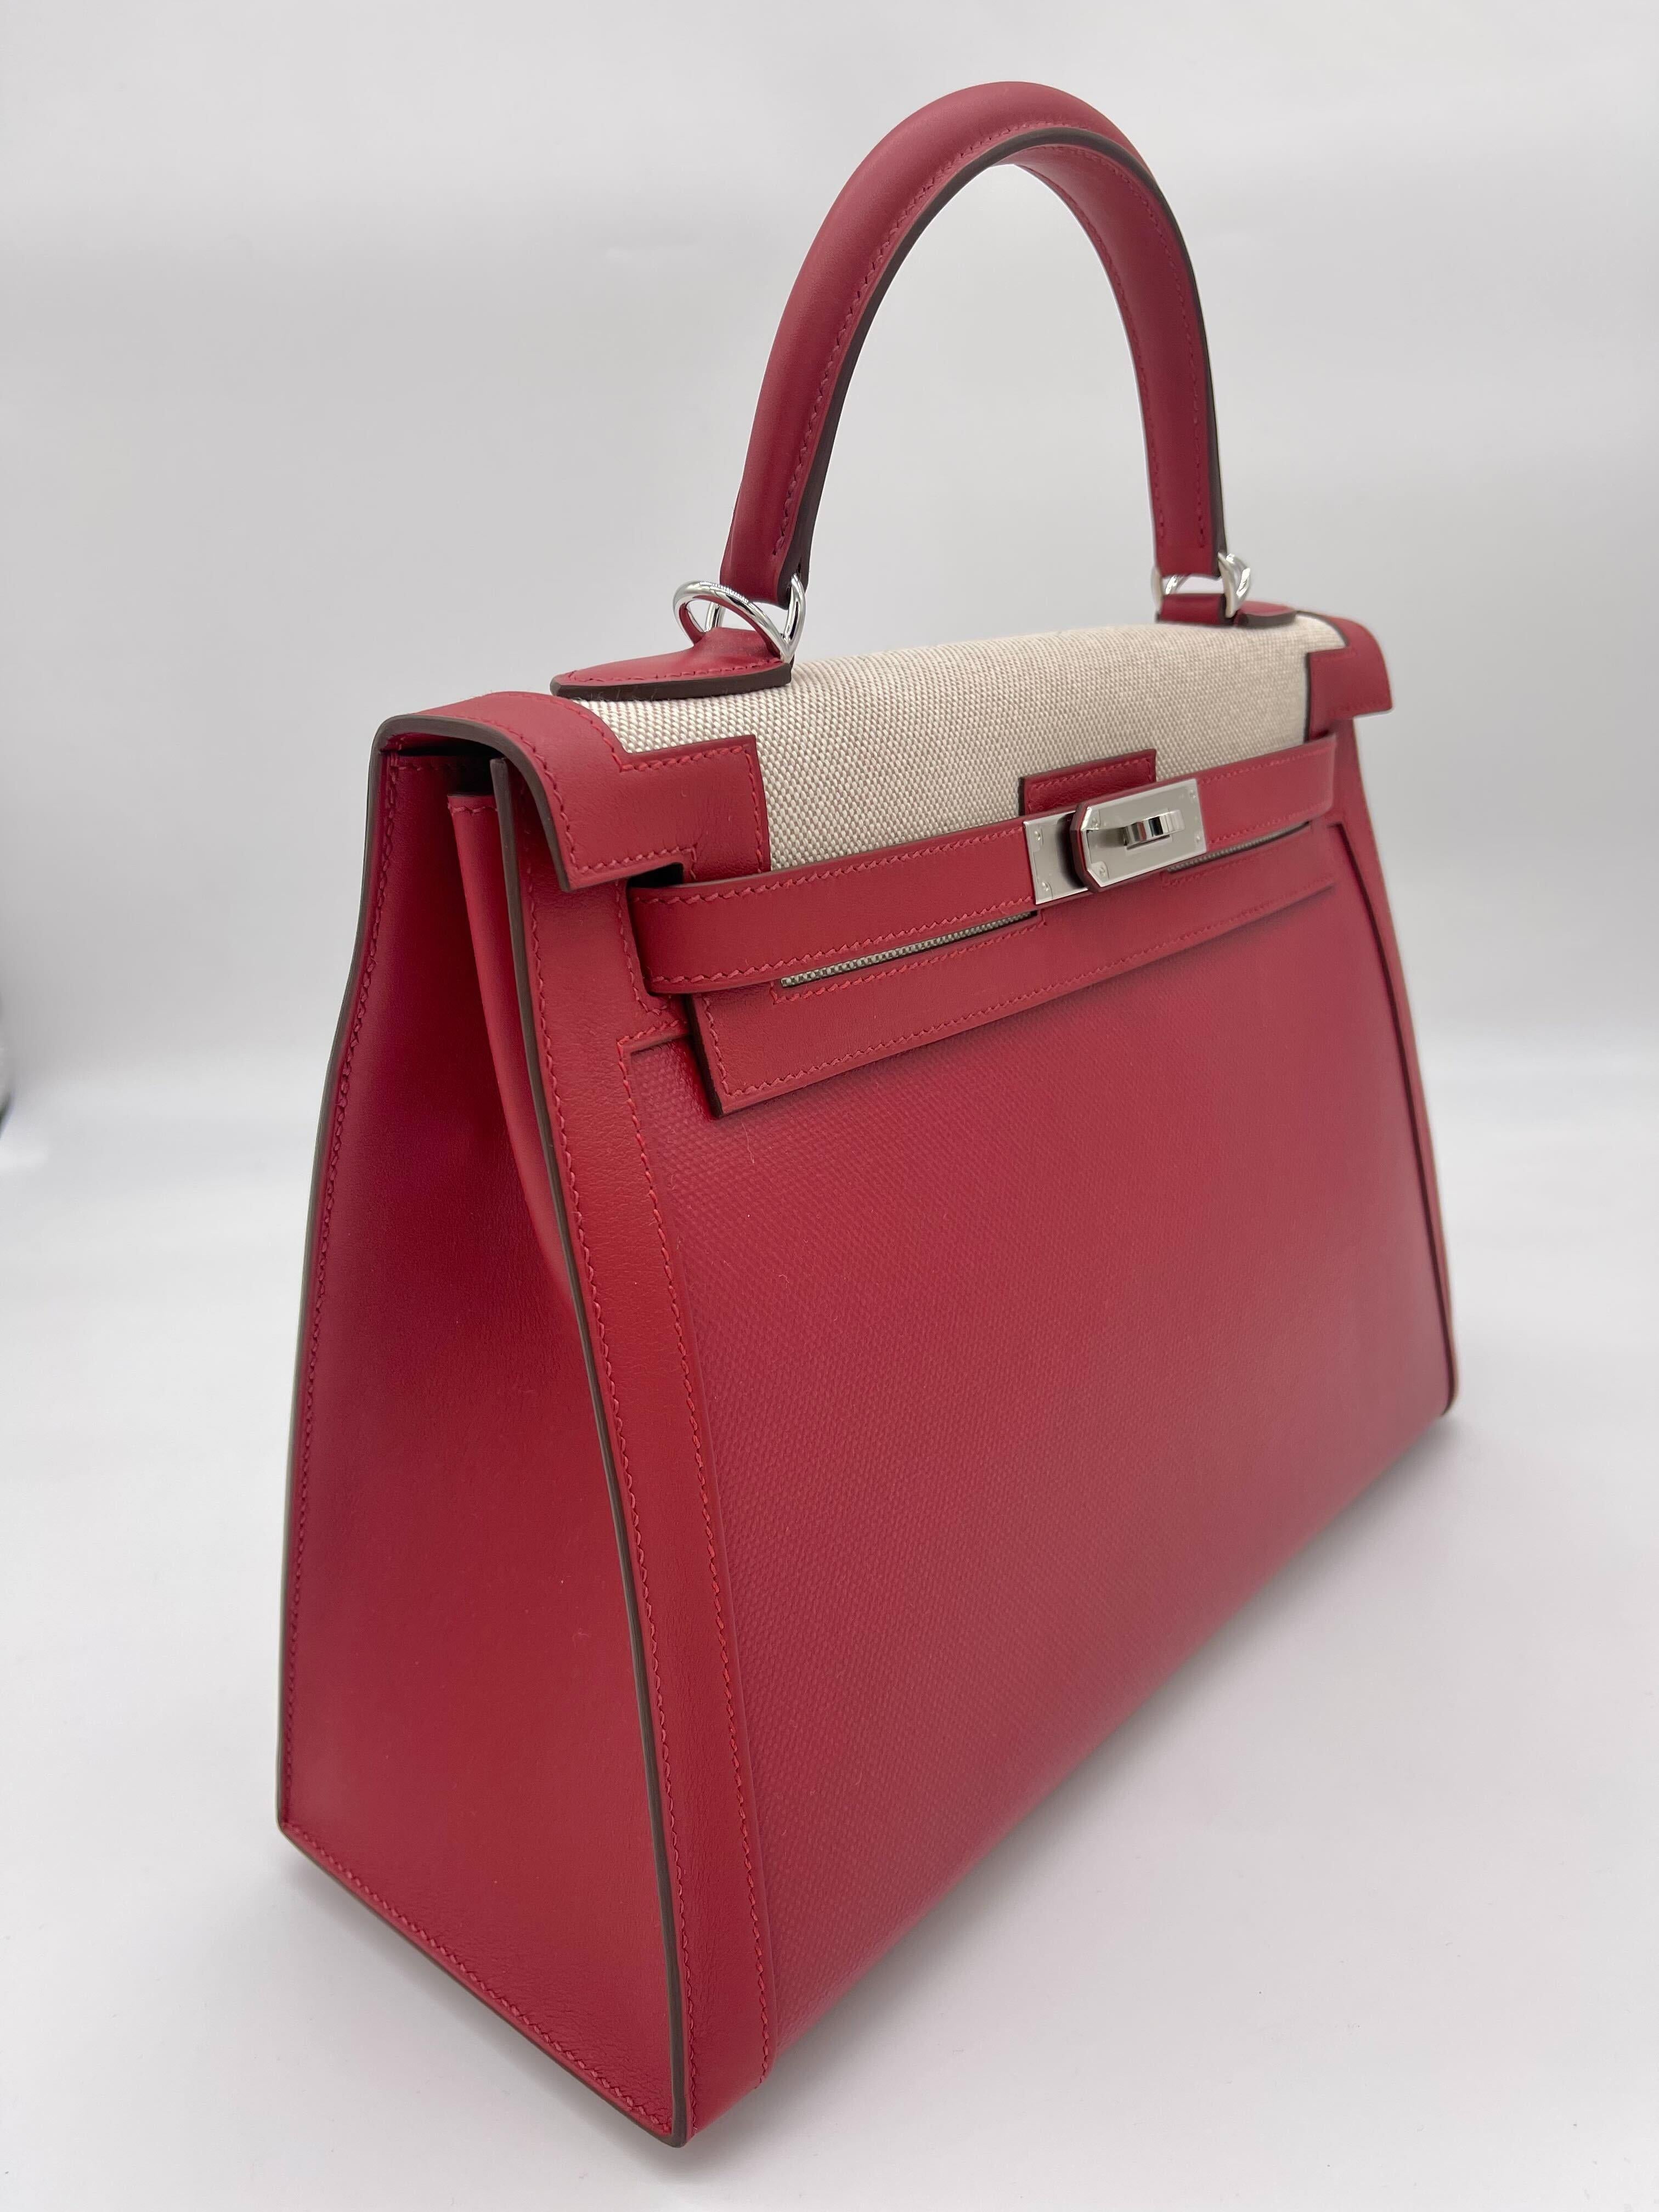 Hermes Kelly 32 Sellier Rouge Piment Swift and Toile Berline Palladium Hardware In New Condition For Sale In New York, NY